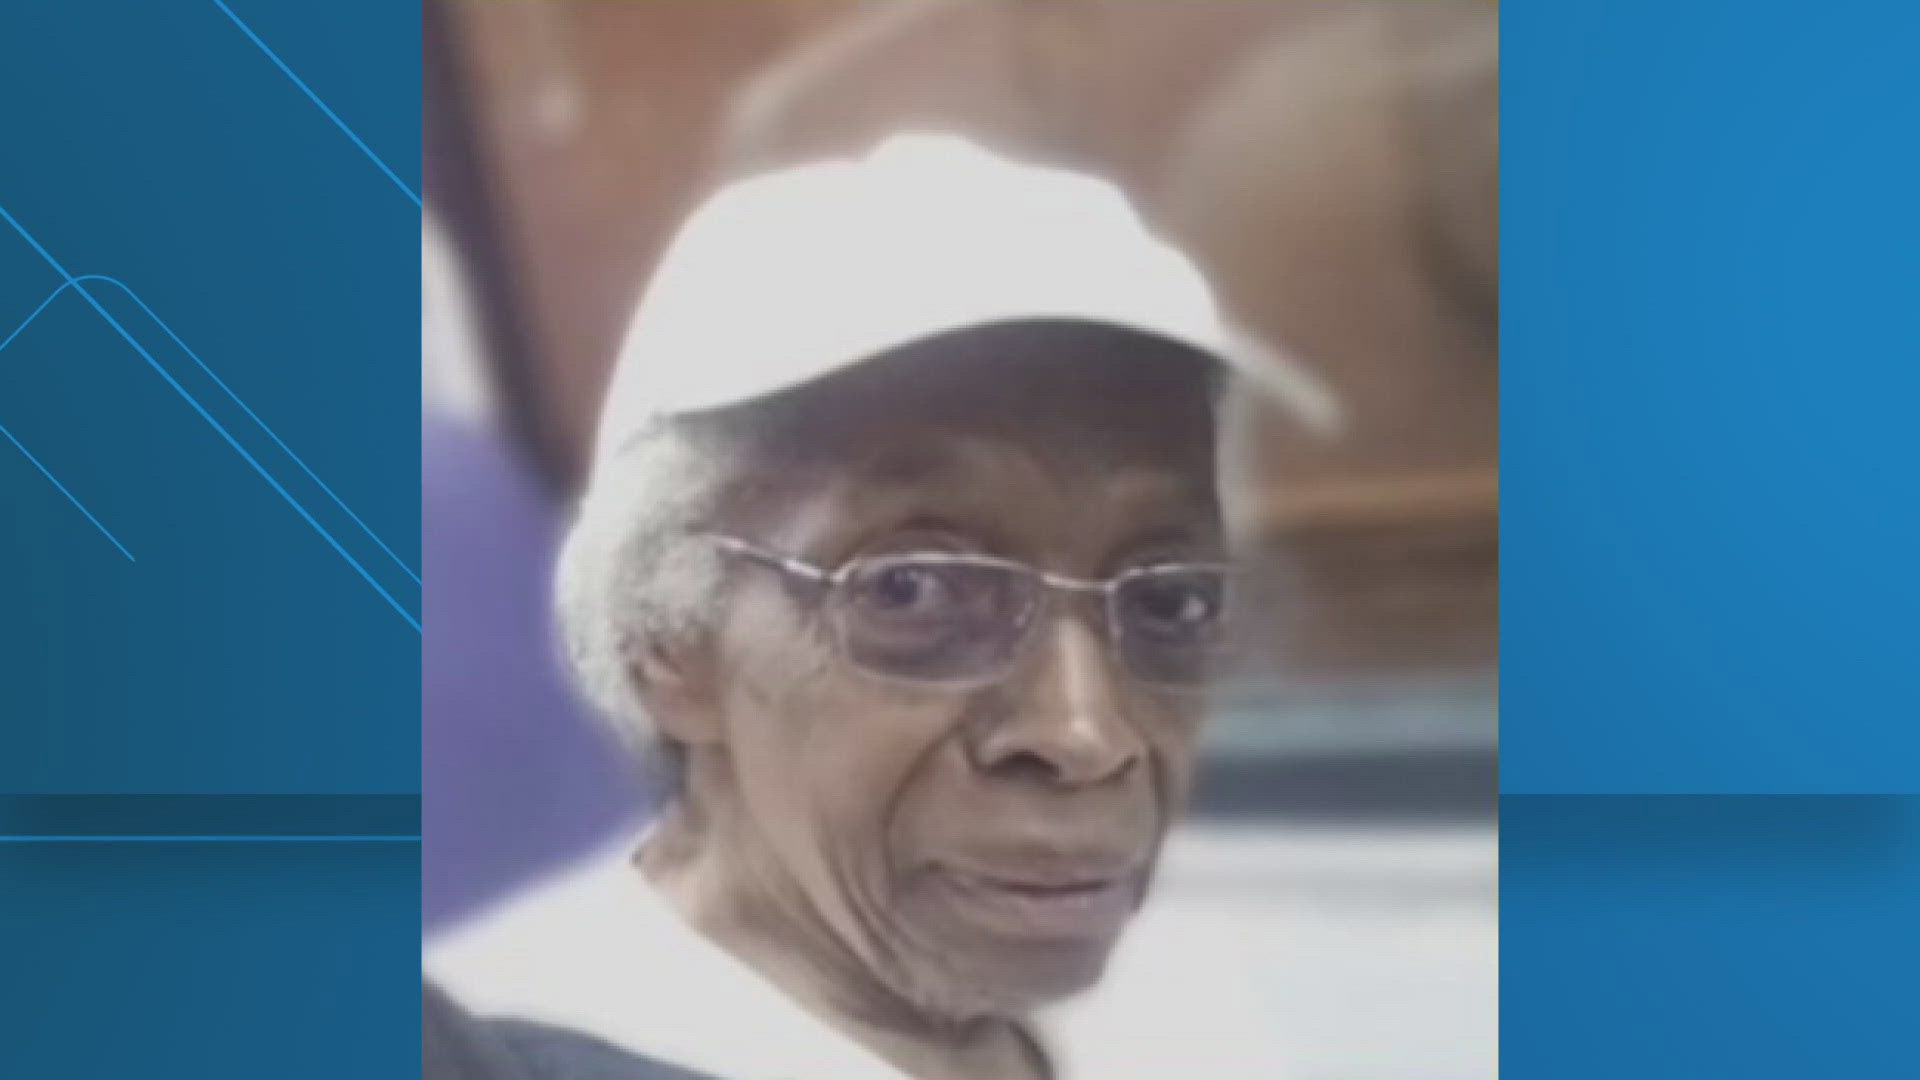 Frances Wood, was last seen in the 900 block of G Street, Northwest Saturday afternoon.